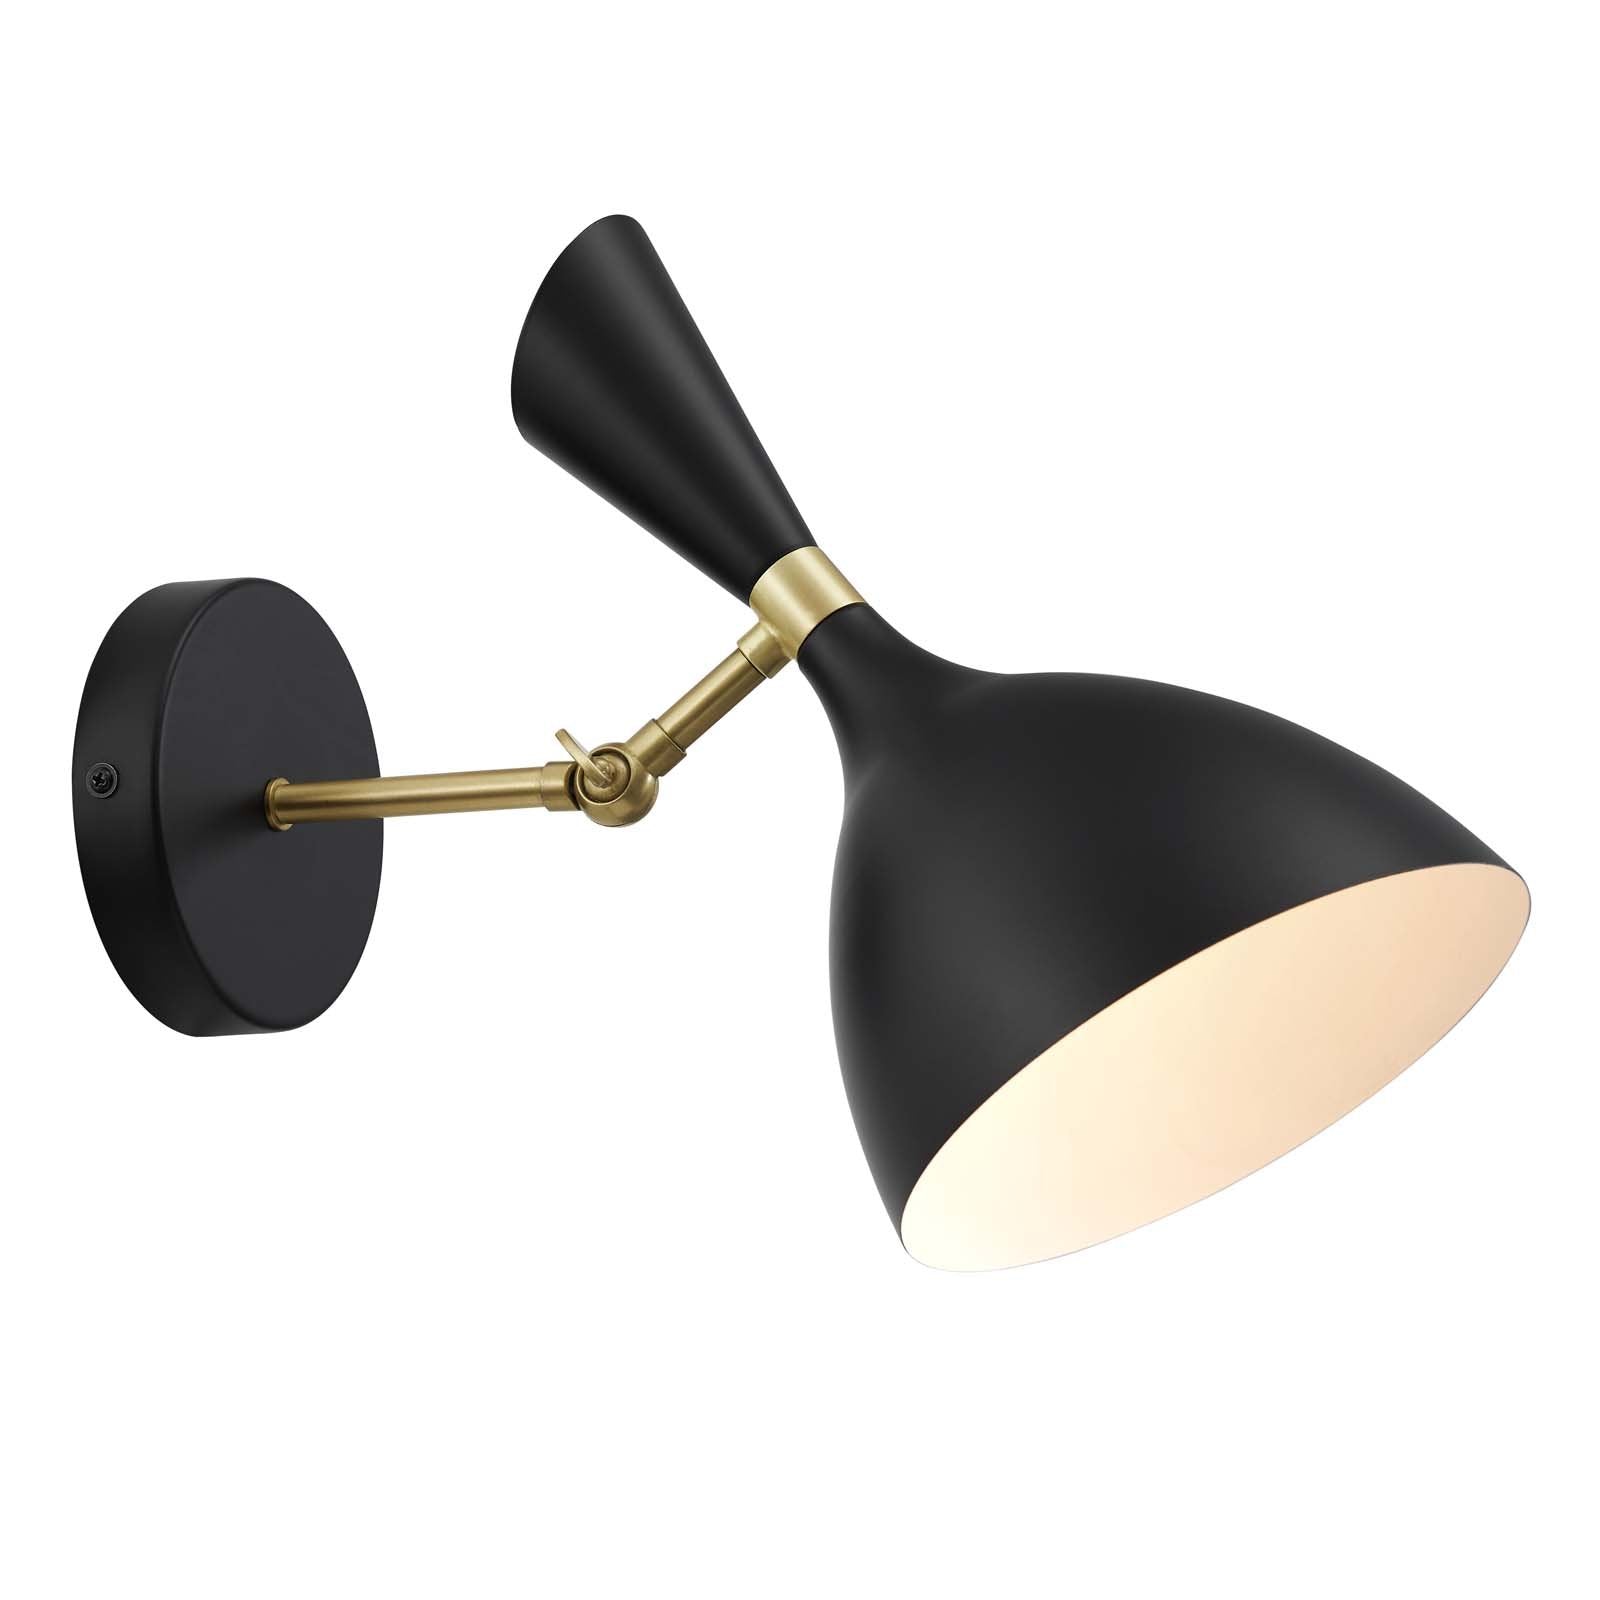 Declare Adjustable Wall Sconce - East Shore Modern Home Furnishings